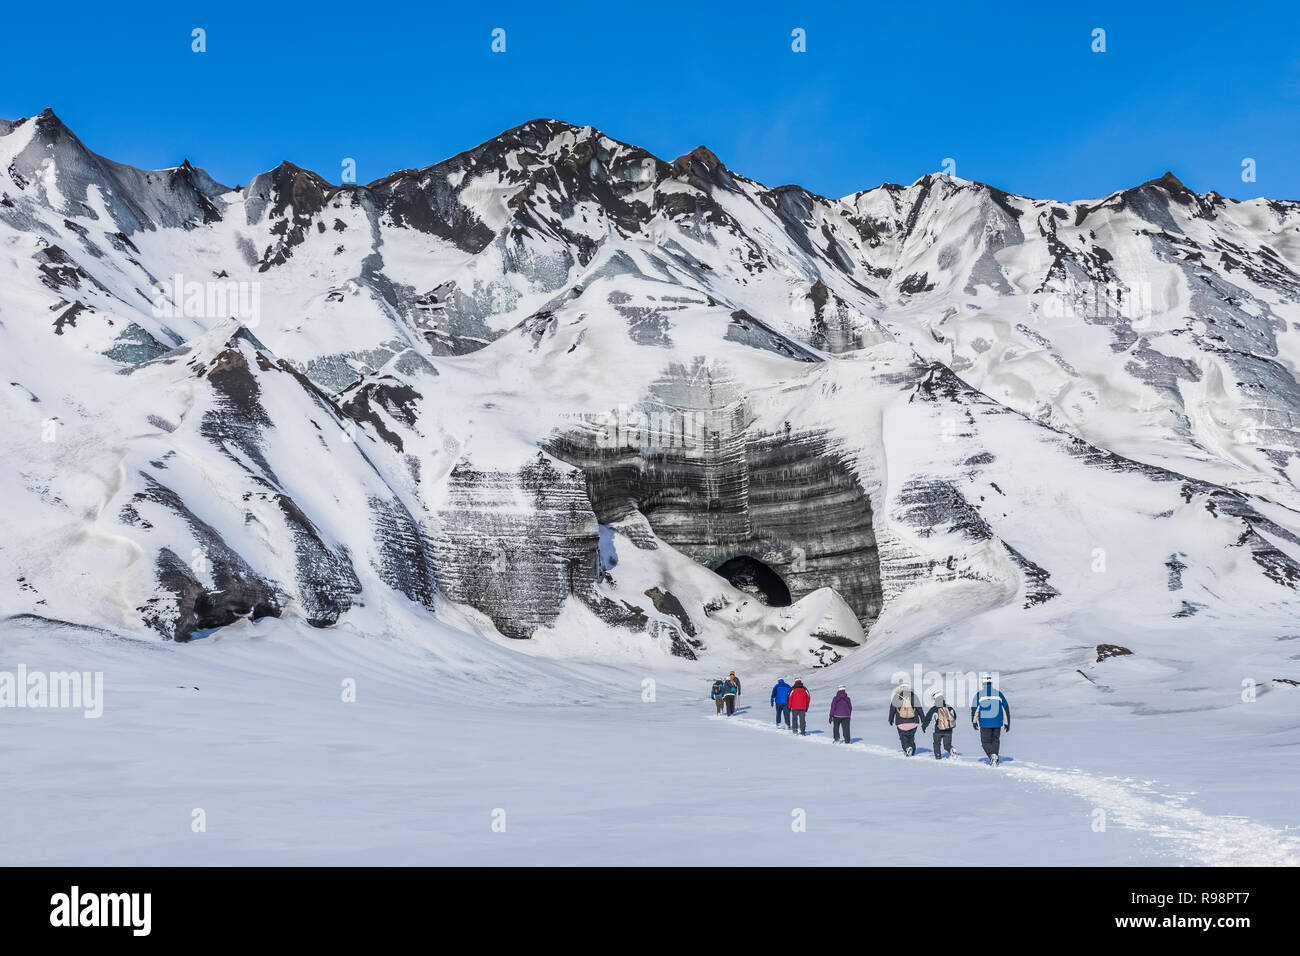 Adventurers walking toward an ice cave entrance in a lobe of Mýrdalsjökull Glacier, which sits atop Katla Volcano, in winter in Iceland [No model rele Stock Photo